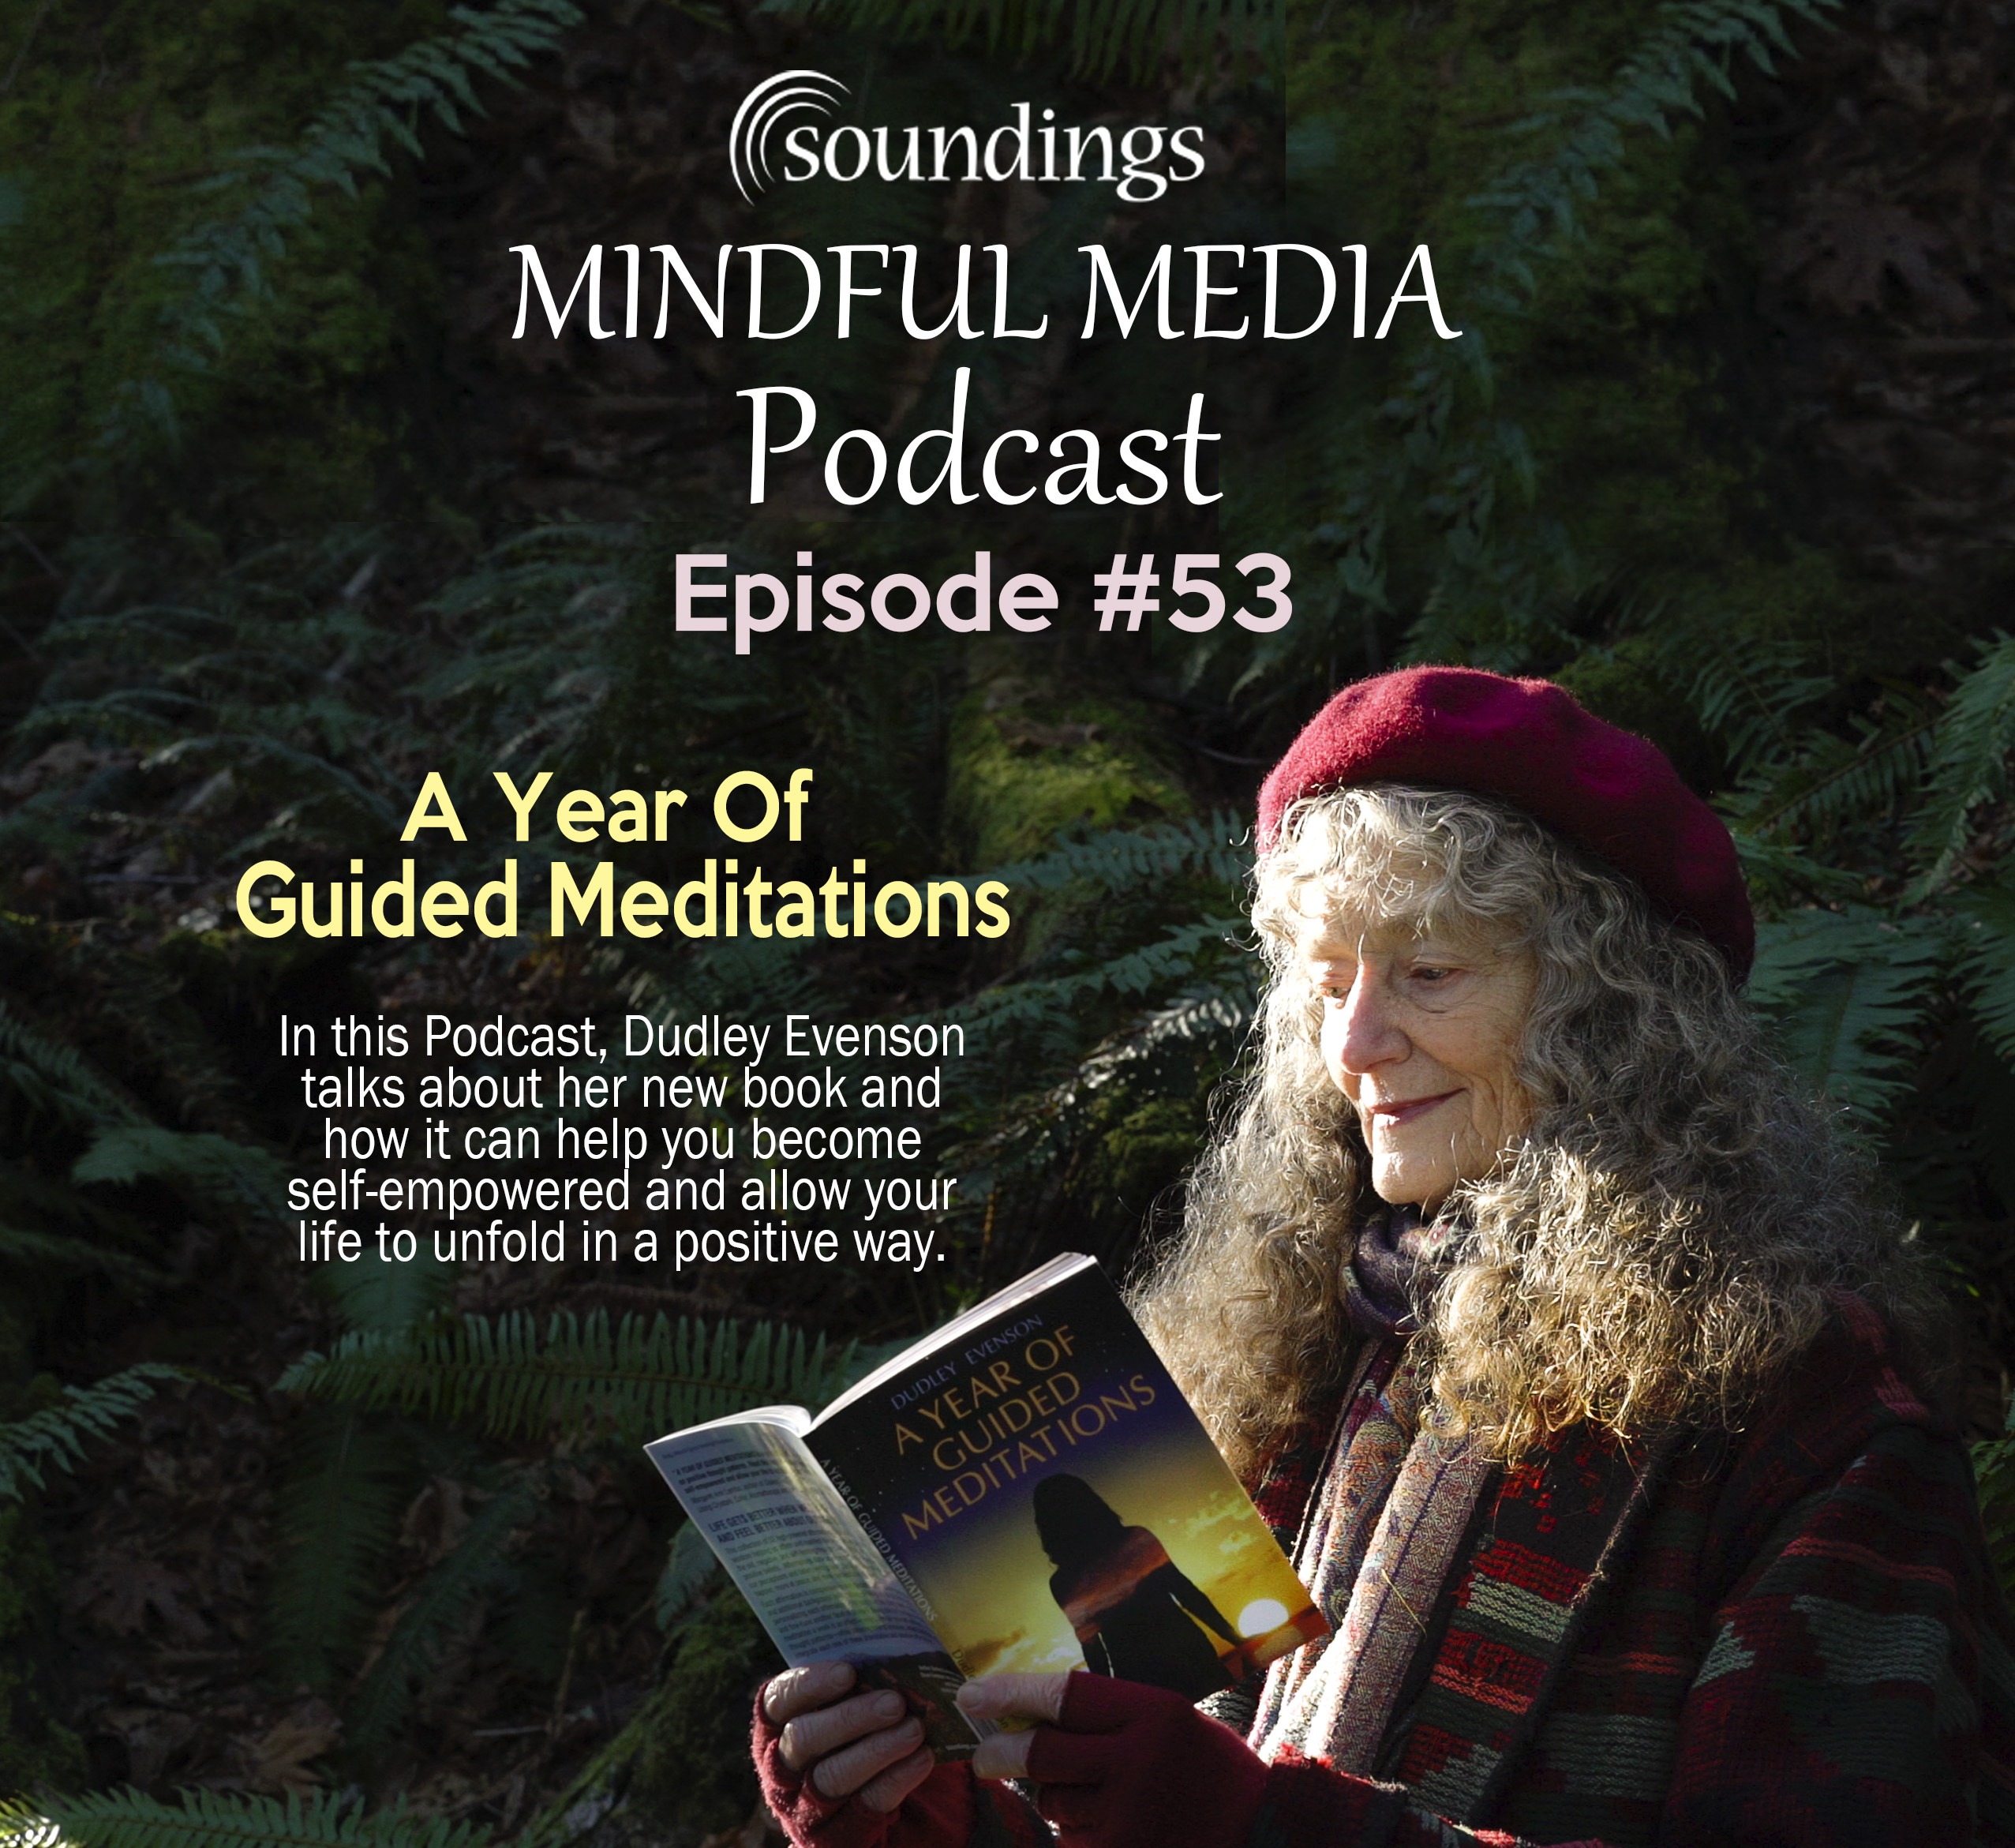 A Year of Guided Meditations on Soundings Mindful Media Podcast